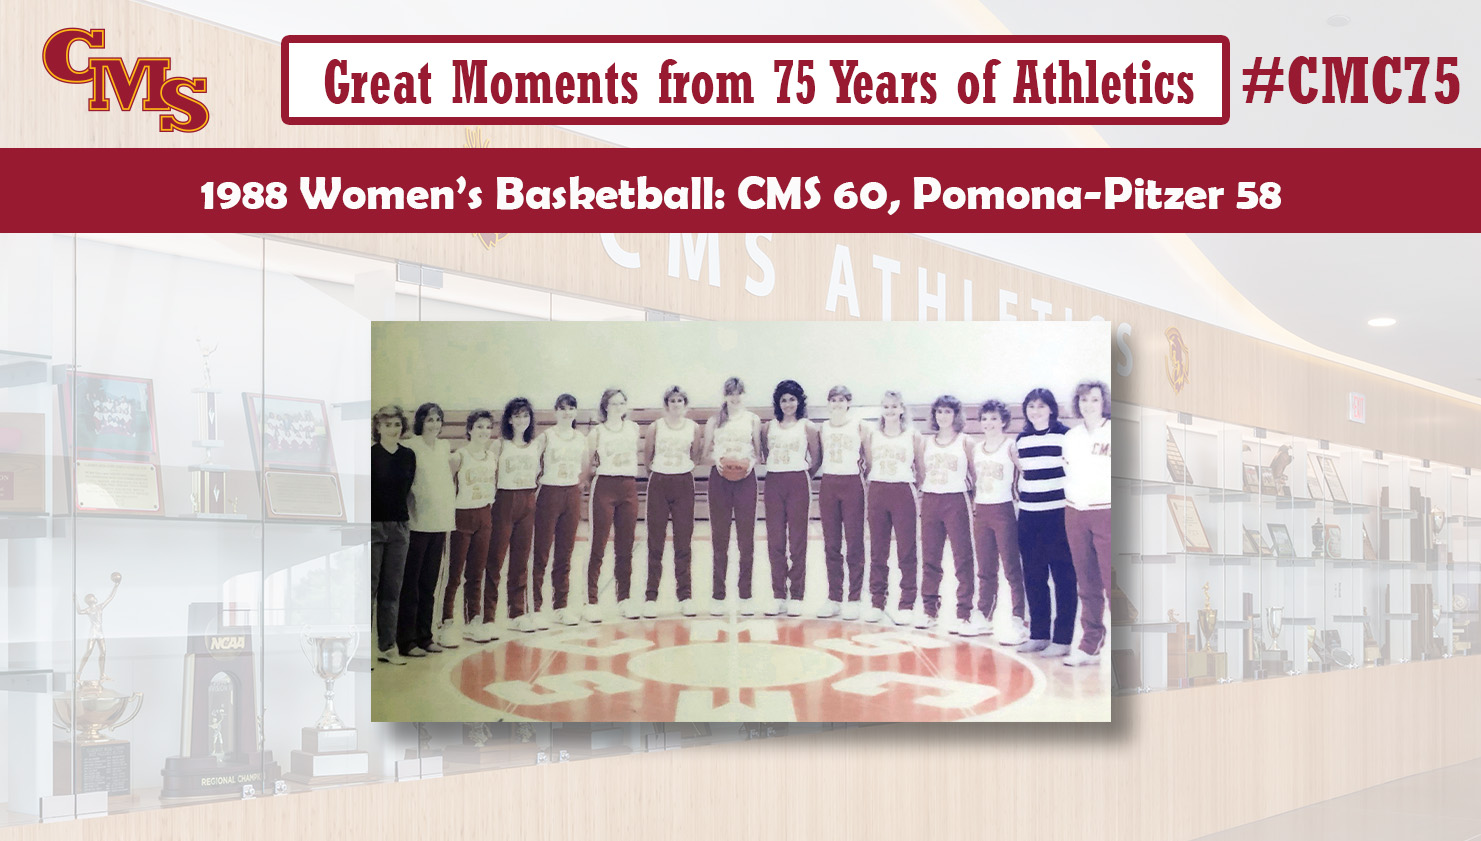 The 1988 CMS Women's Basketball team. Words over the photo read: Great Moments from 75 Years of Athletics. 1988 Women's Basketball: CMS 60, Pomona-Pitzer 58